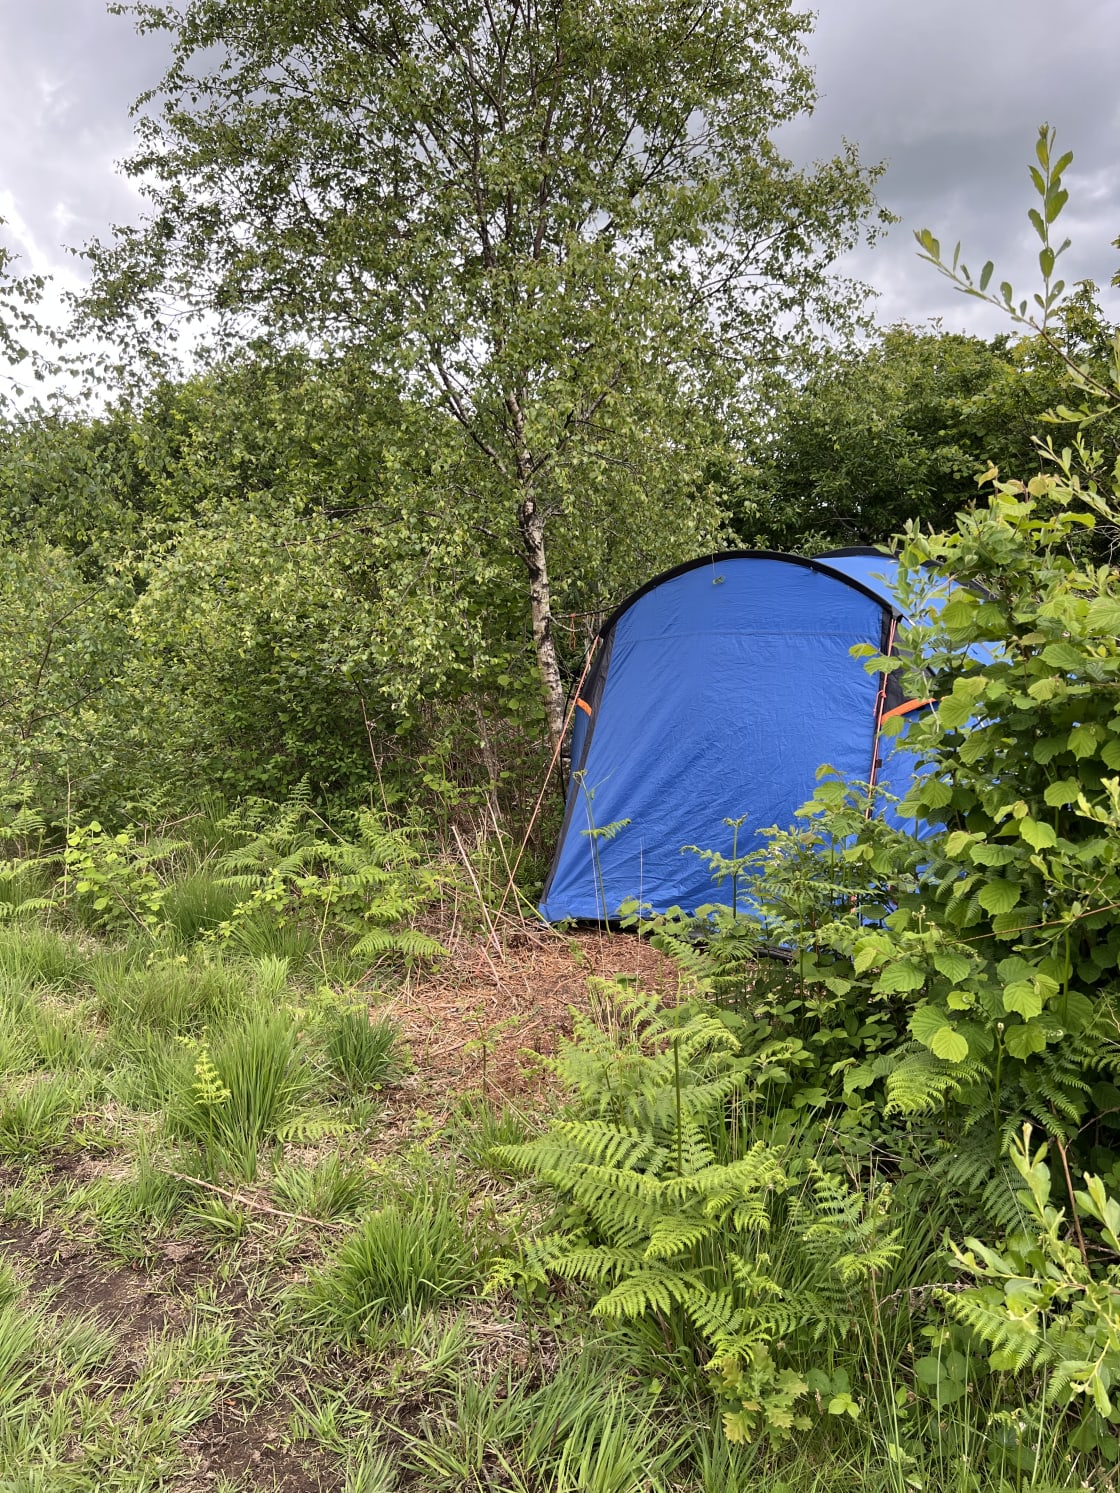 Community camping and glamping